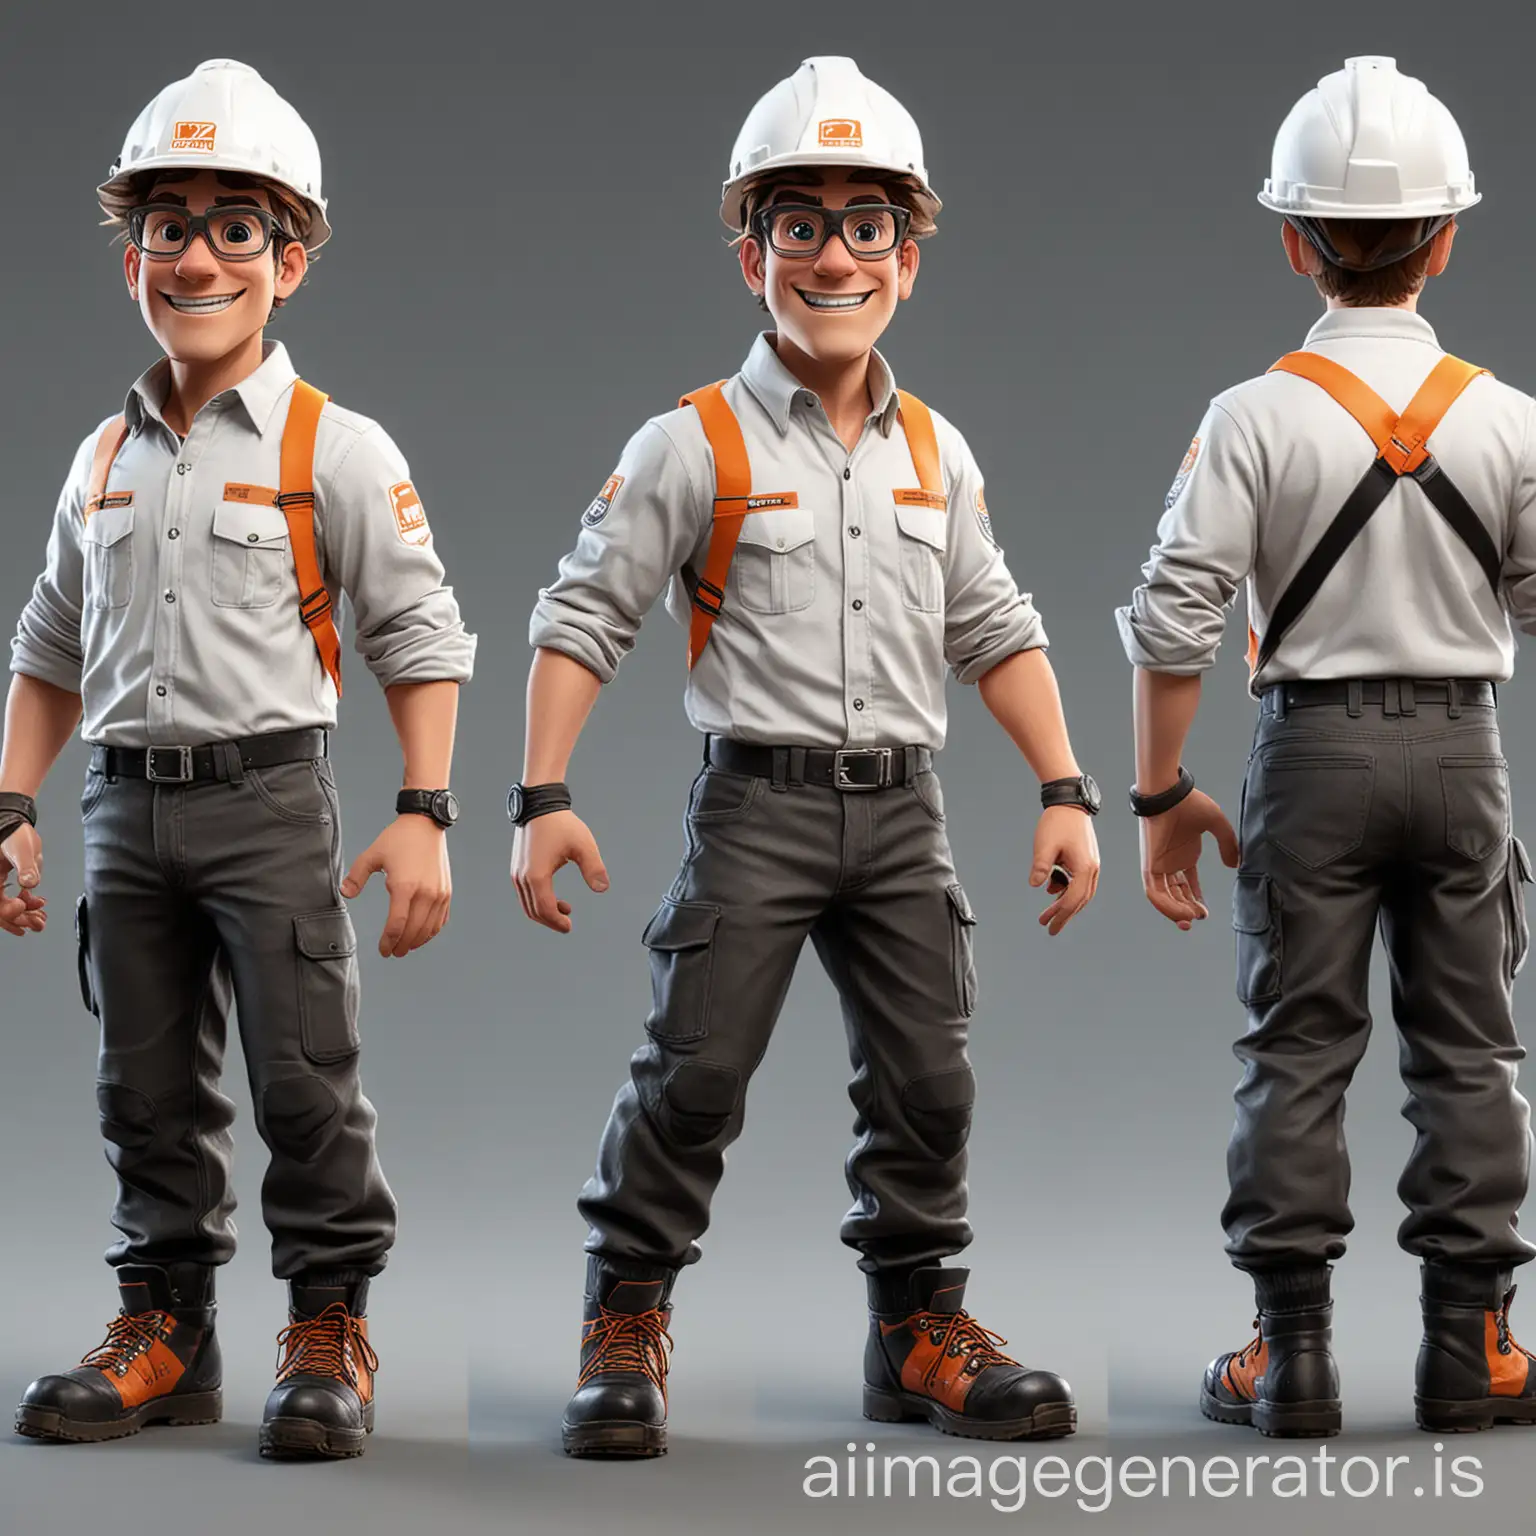 Design a mascot of an animated dashing male character depicted in a lively and celebratory front pose. The character should be dressed in mining clothing including a reflective full sleeve plain t-shirt , trouser, safety goggles, white safety helmet, and black safety shoes.